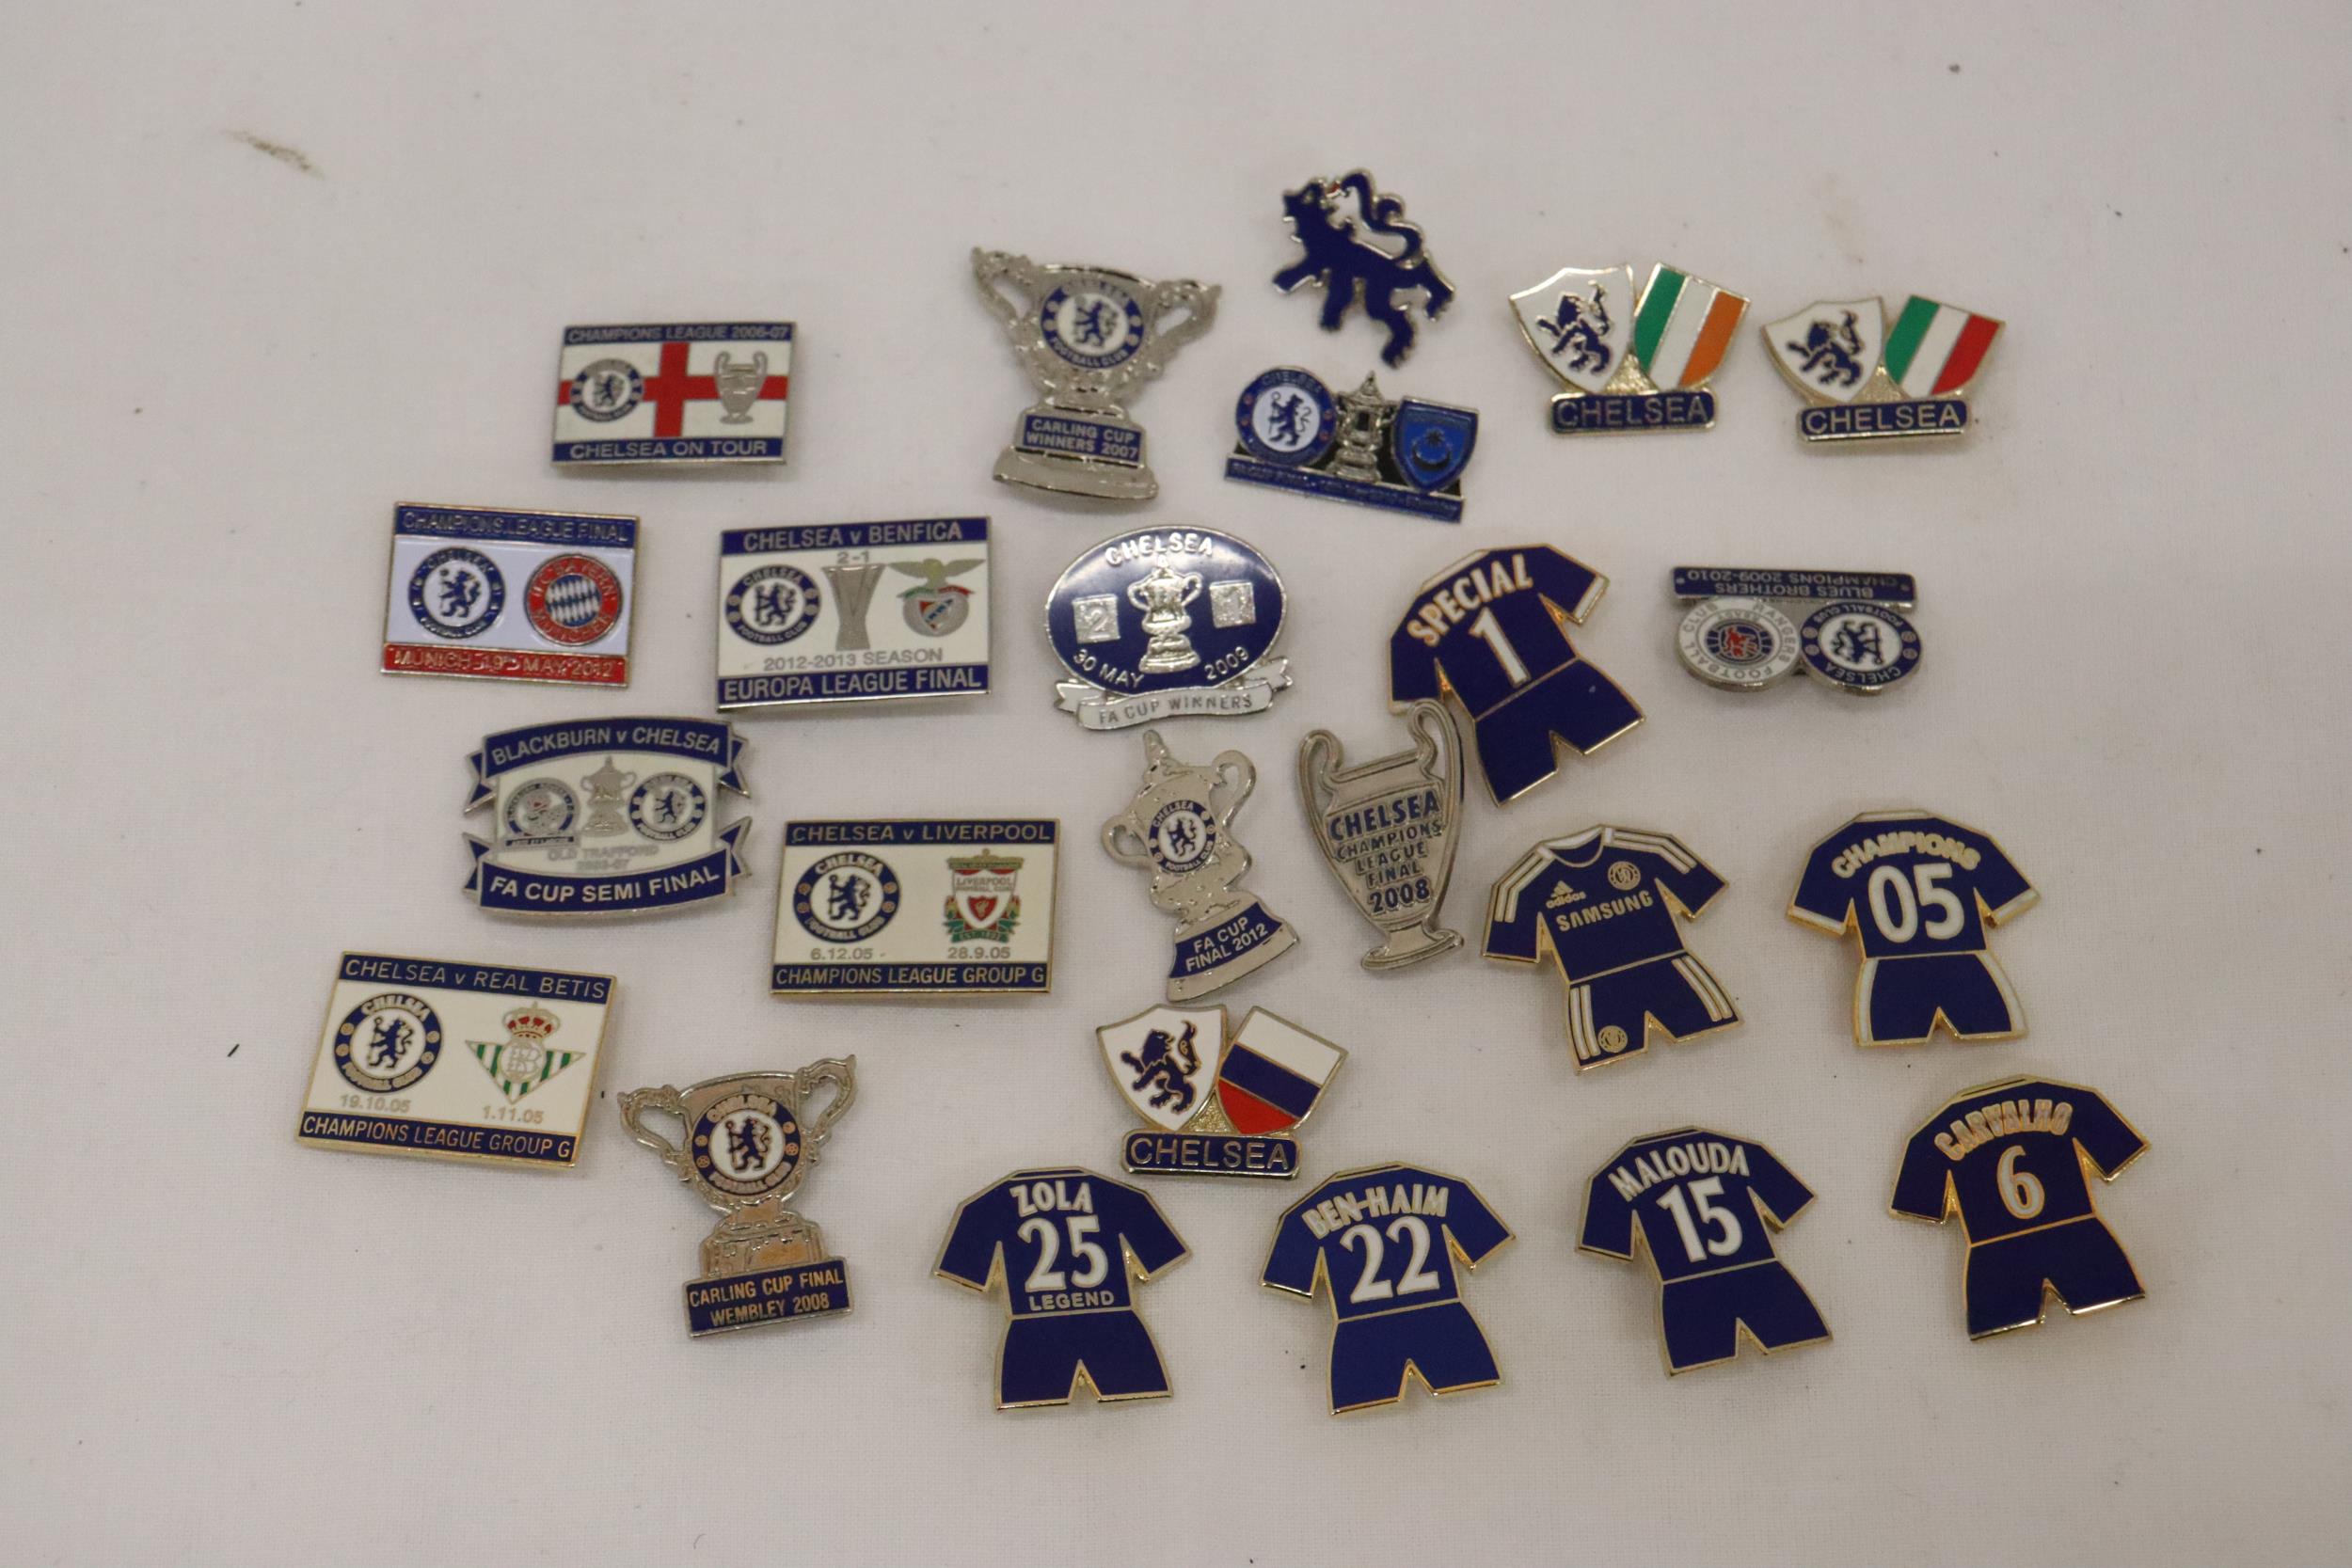 A COLLECTION OF ENAMEL CHELSEA FC BADGES - 23 IN TOTAL